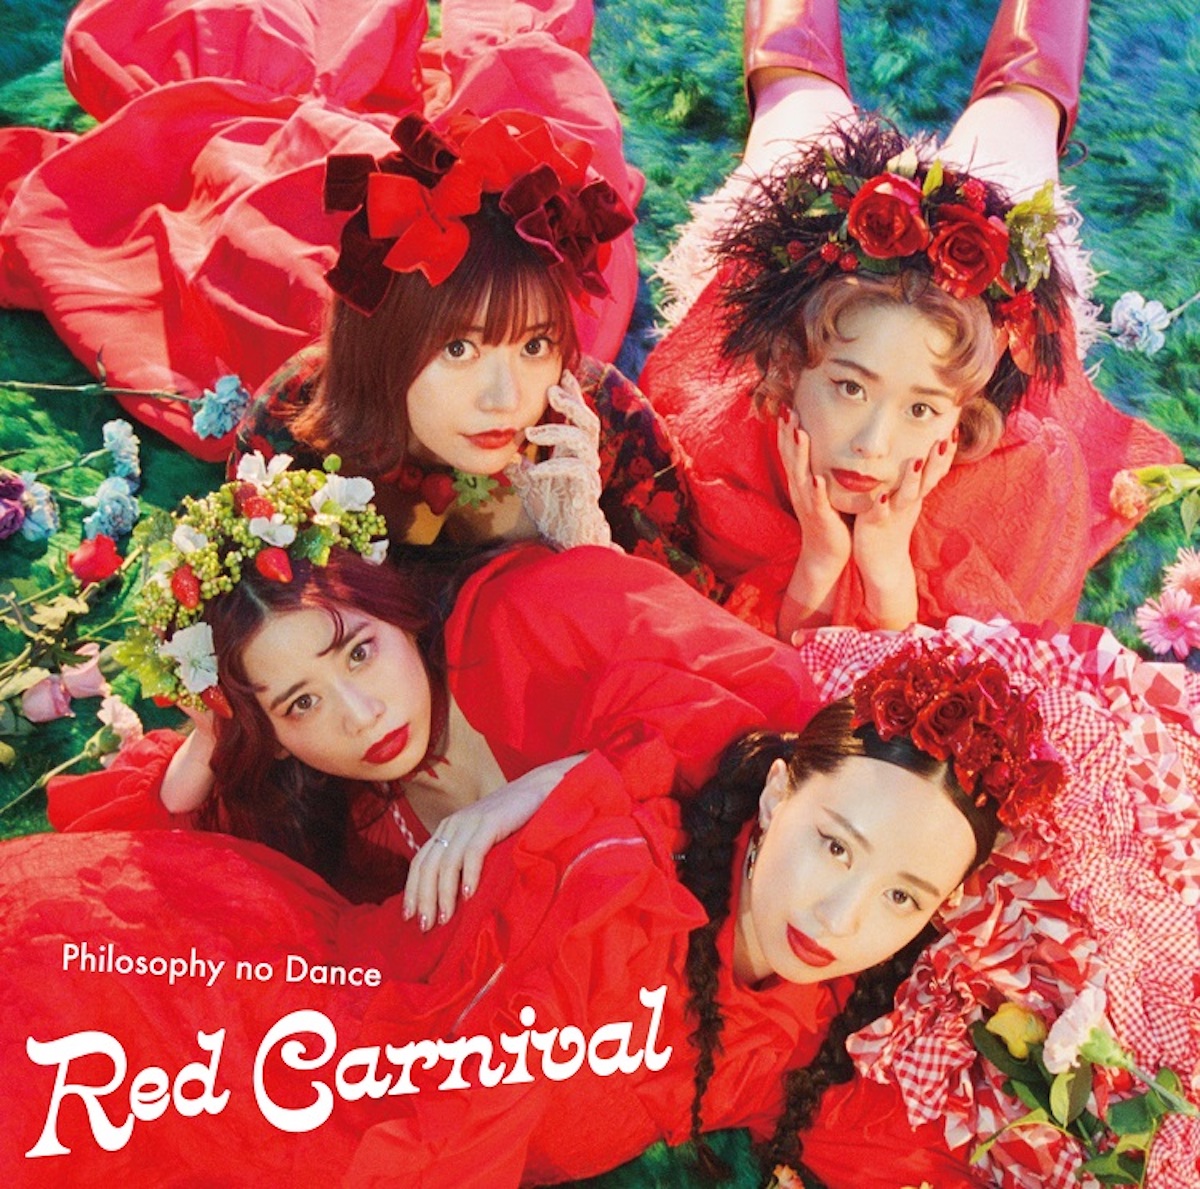 Cover art for『Philosophy no Dance - Clap your hands』from the release『Red Carnival